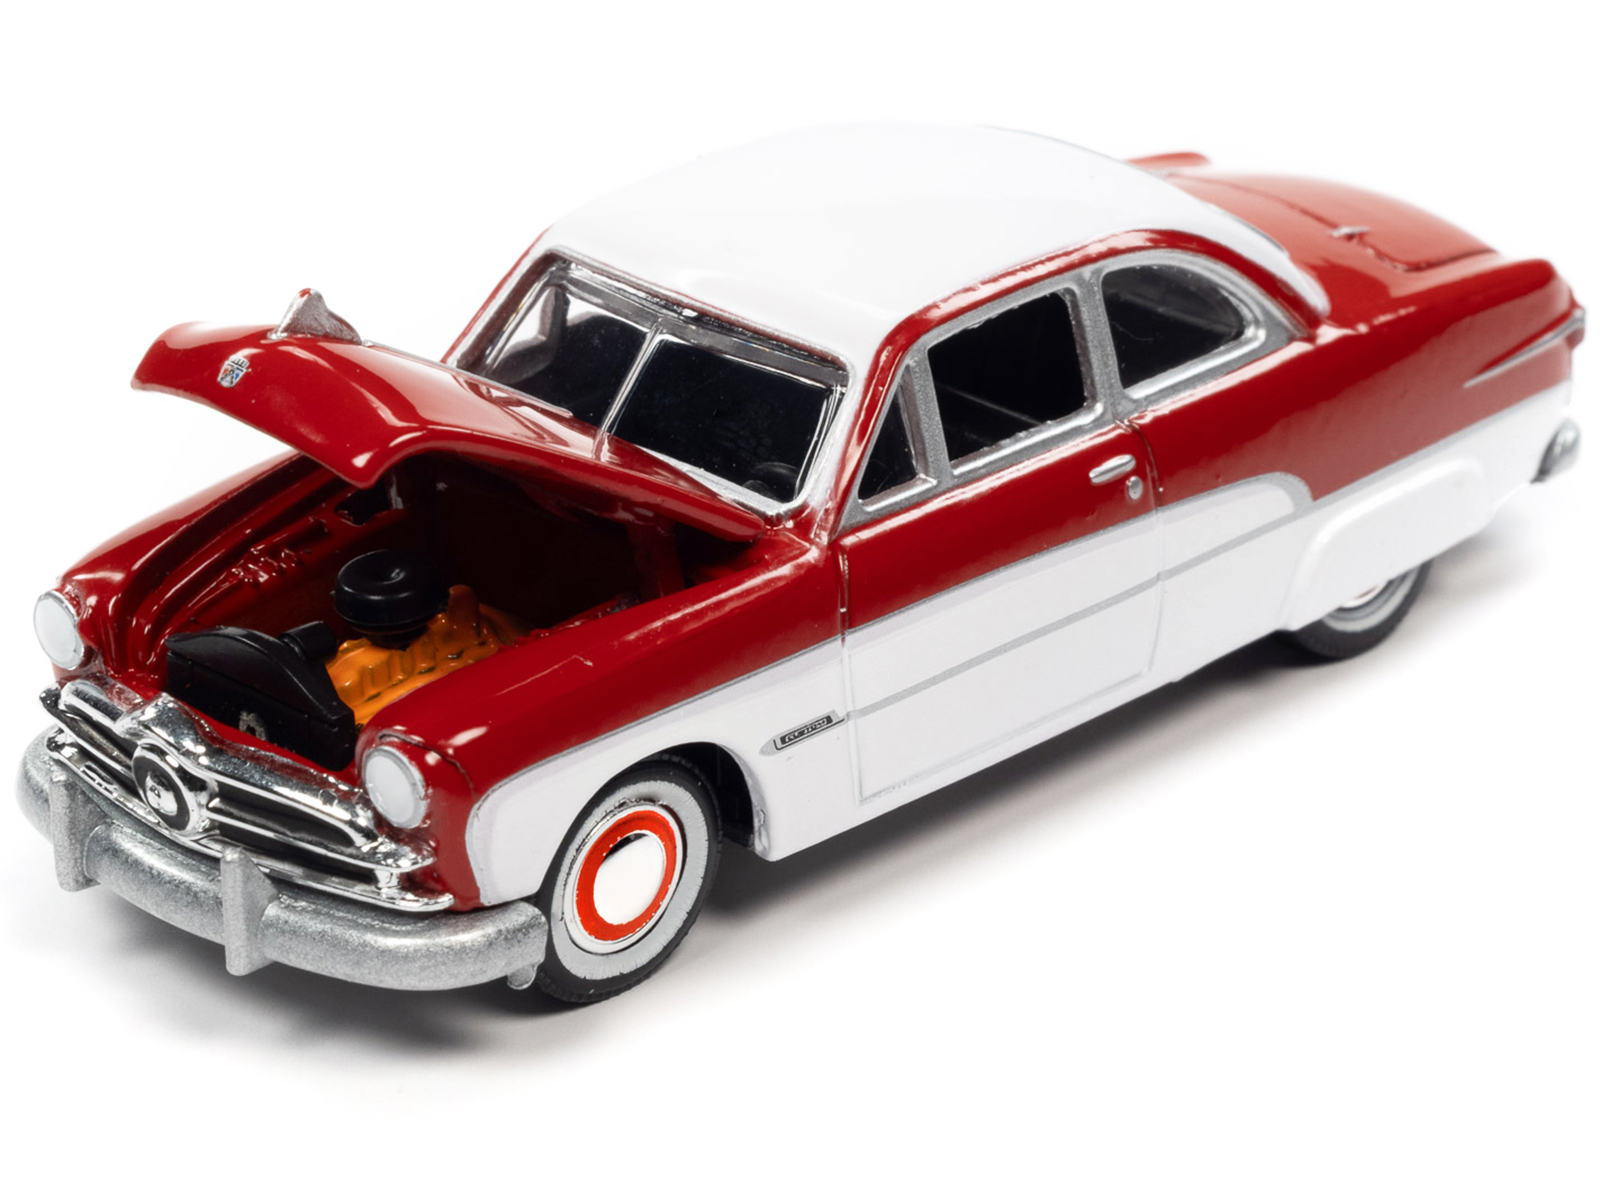 RACING CHAMPIONS 1950 Ford Coupe Red and White "Racing Champions Mint 2022" Relea8548 pieces Worldwide 1/64 Diecast Model Car by Racing Champions